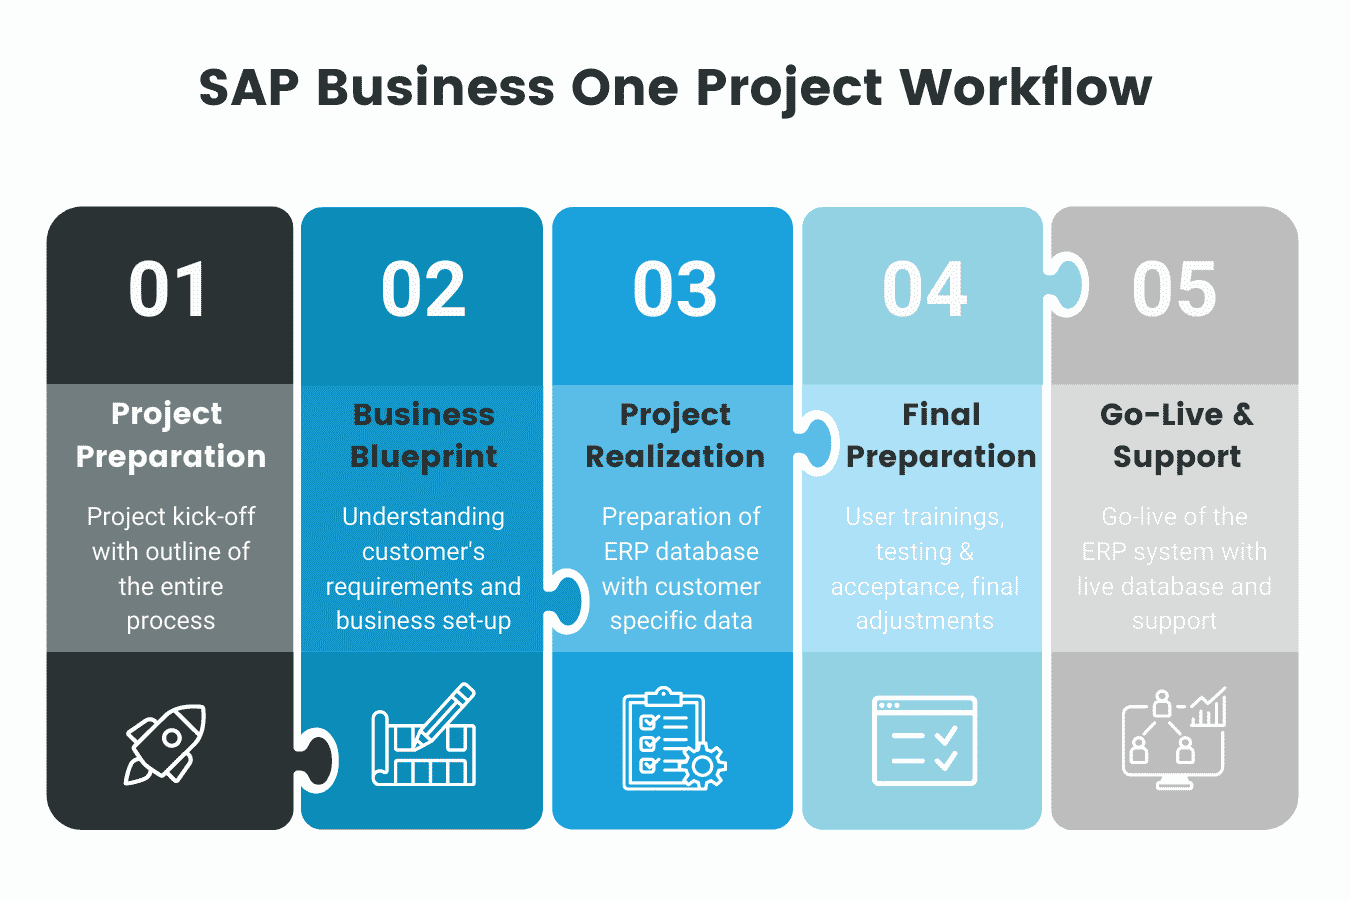 SAP Business One project workflow